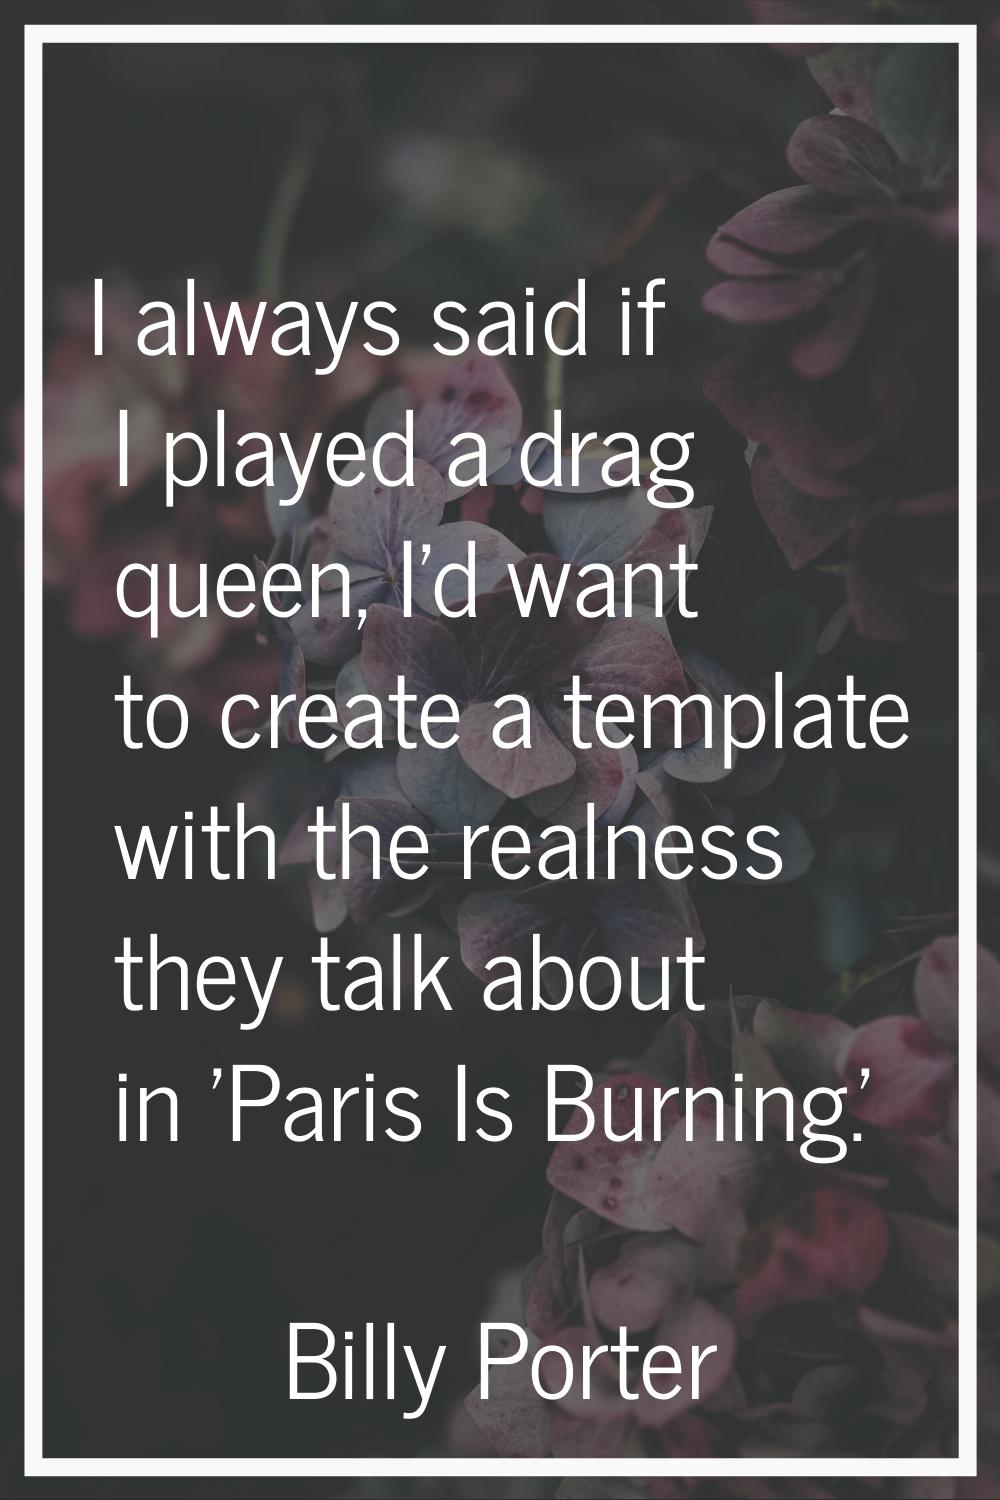 I always said if I played a drag queen, I'd want to create a template with the realness they talk a